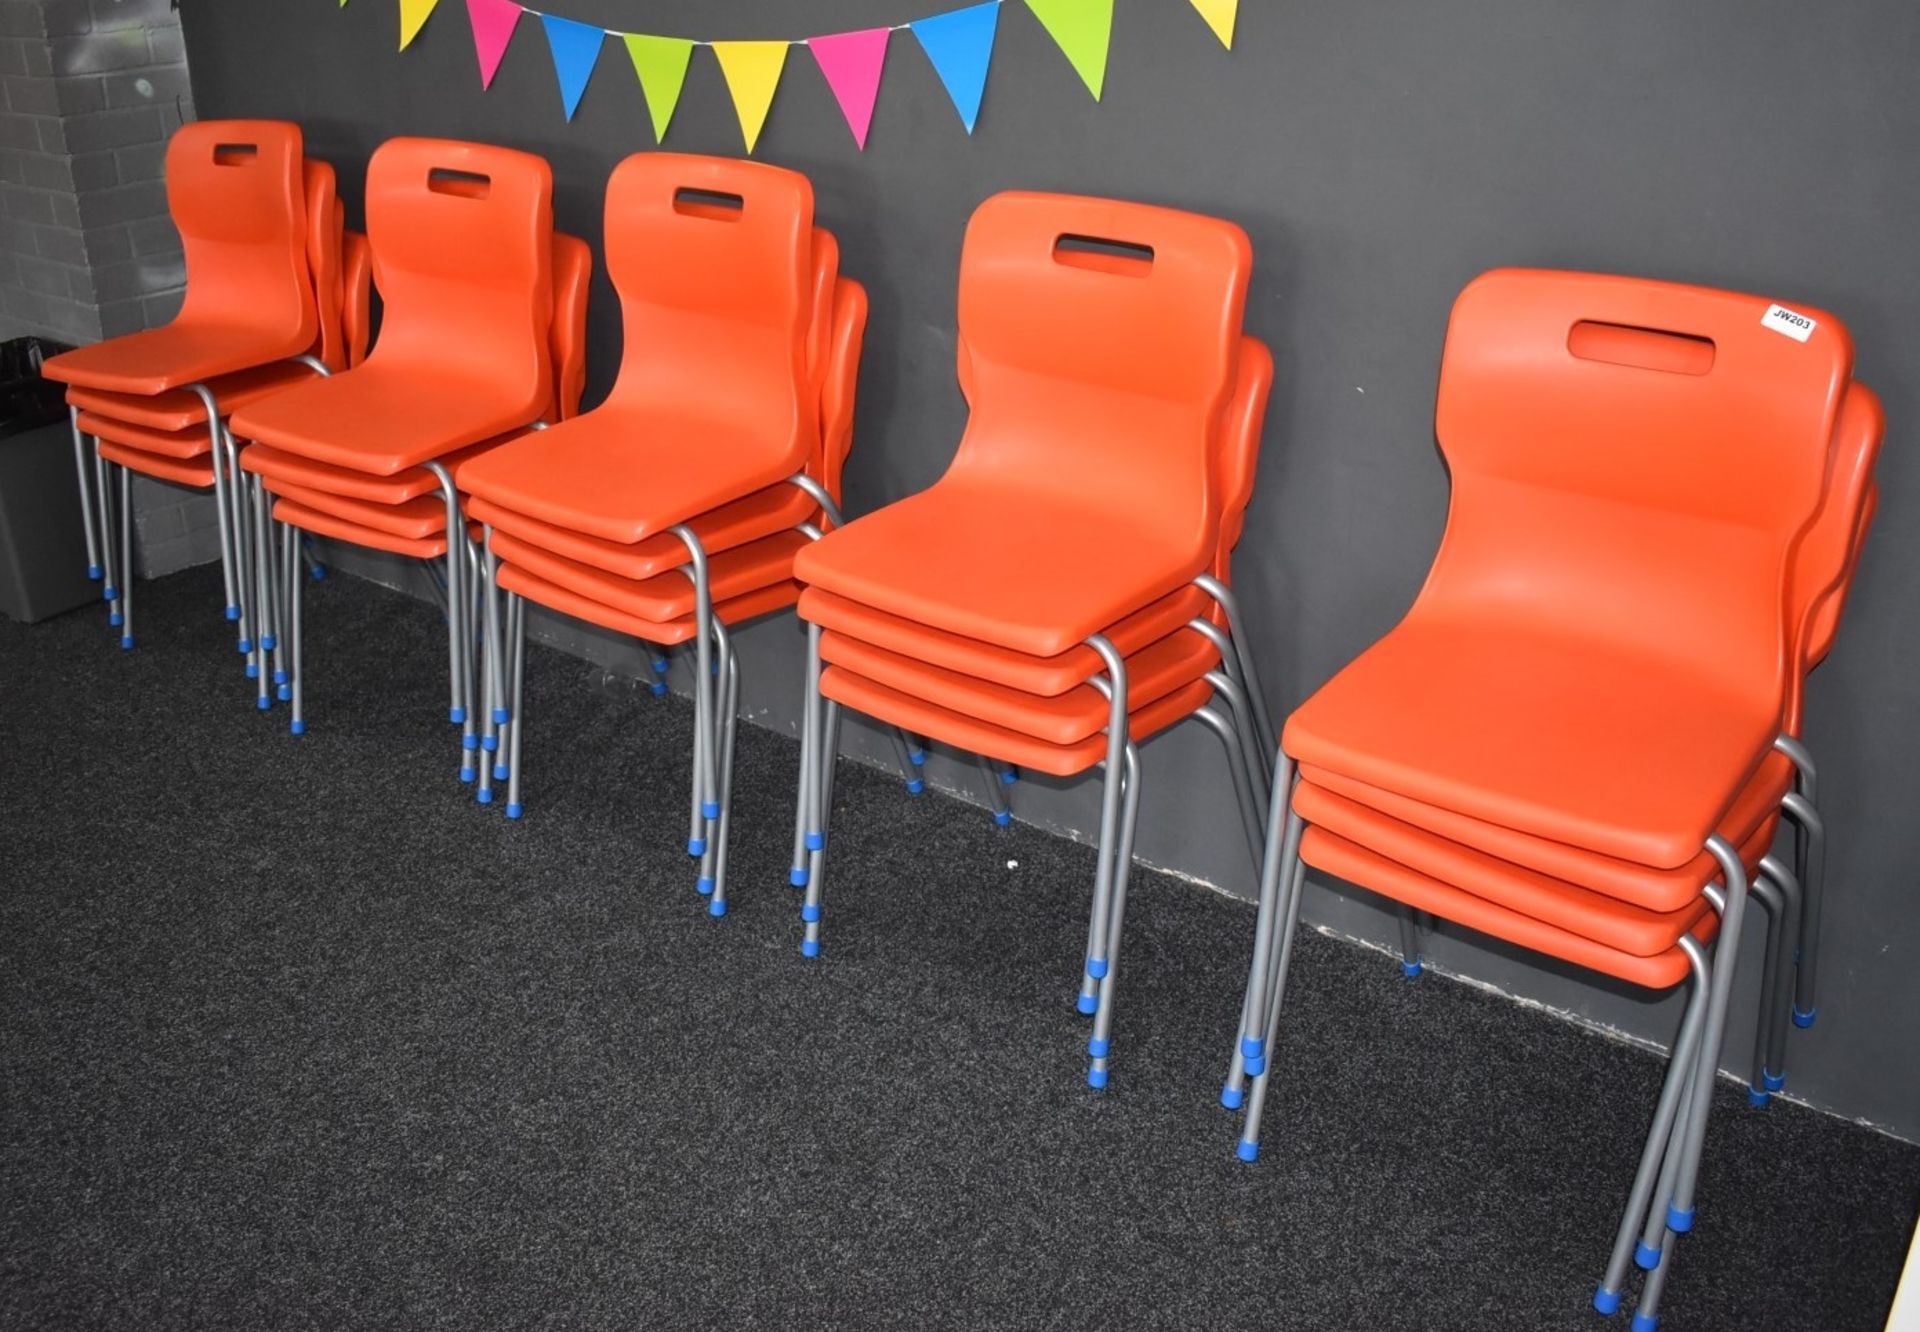 20 x Titan Stackable Chairs With Bright Orange Plastic Seats, Steel Bases and Carry Handles